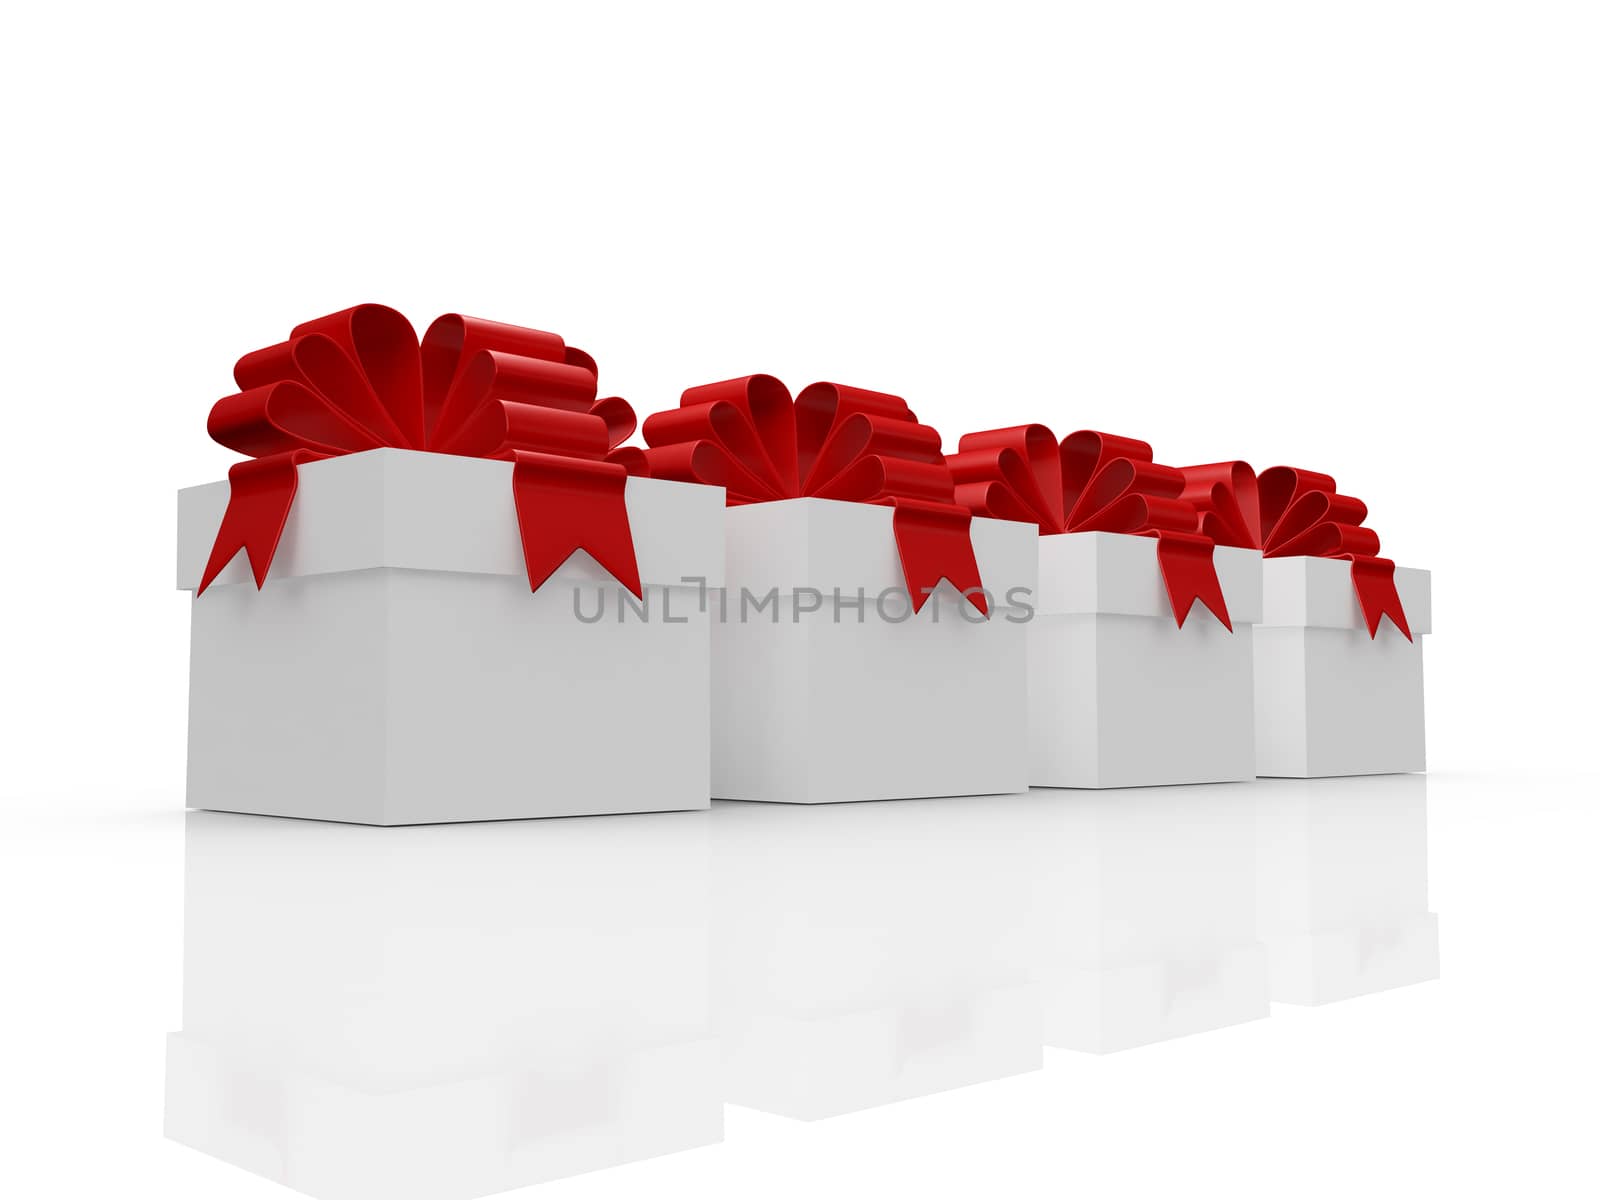 Four white gift boxes with red ribbon for surprise, isolated on white background.